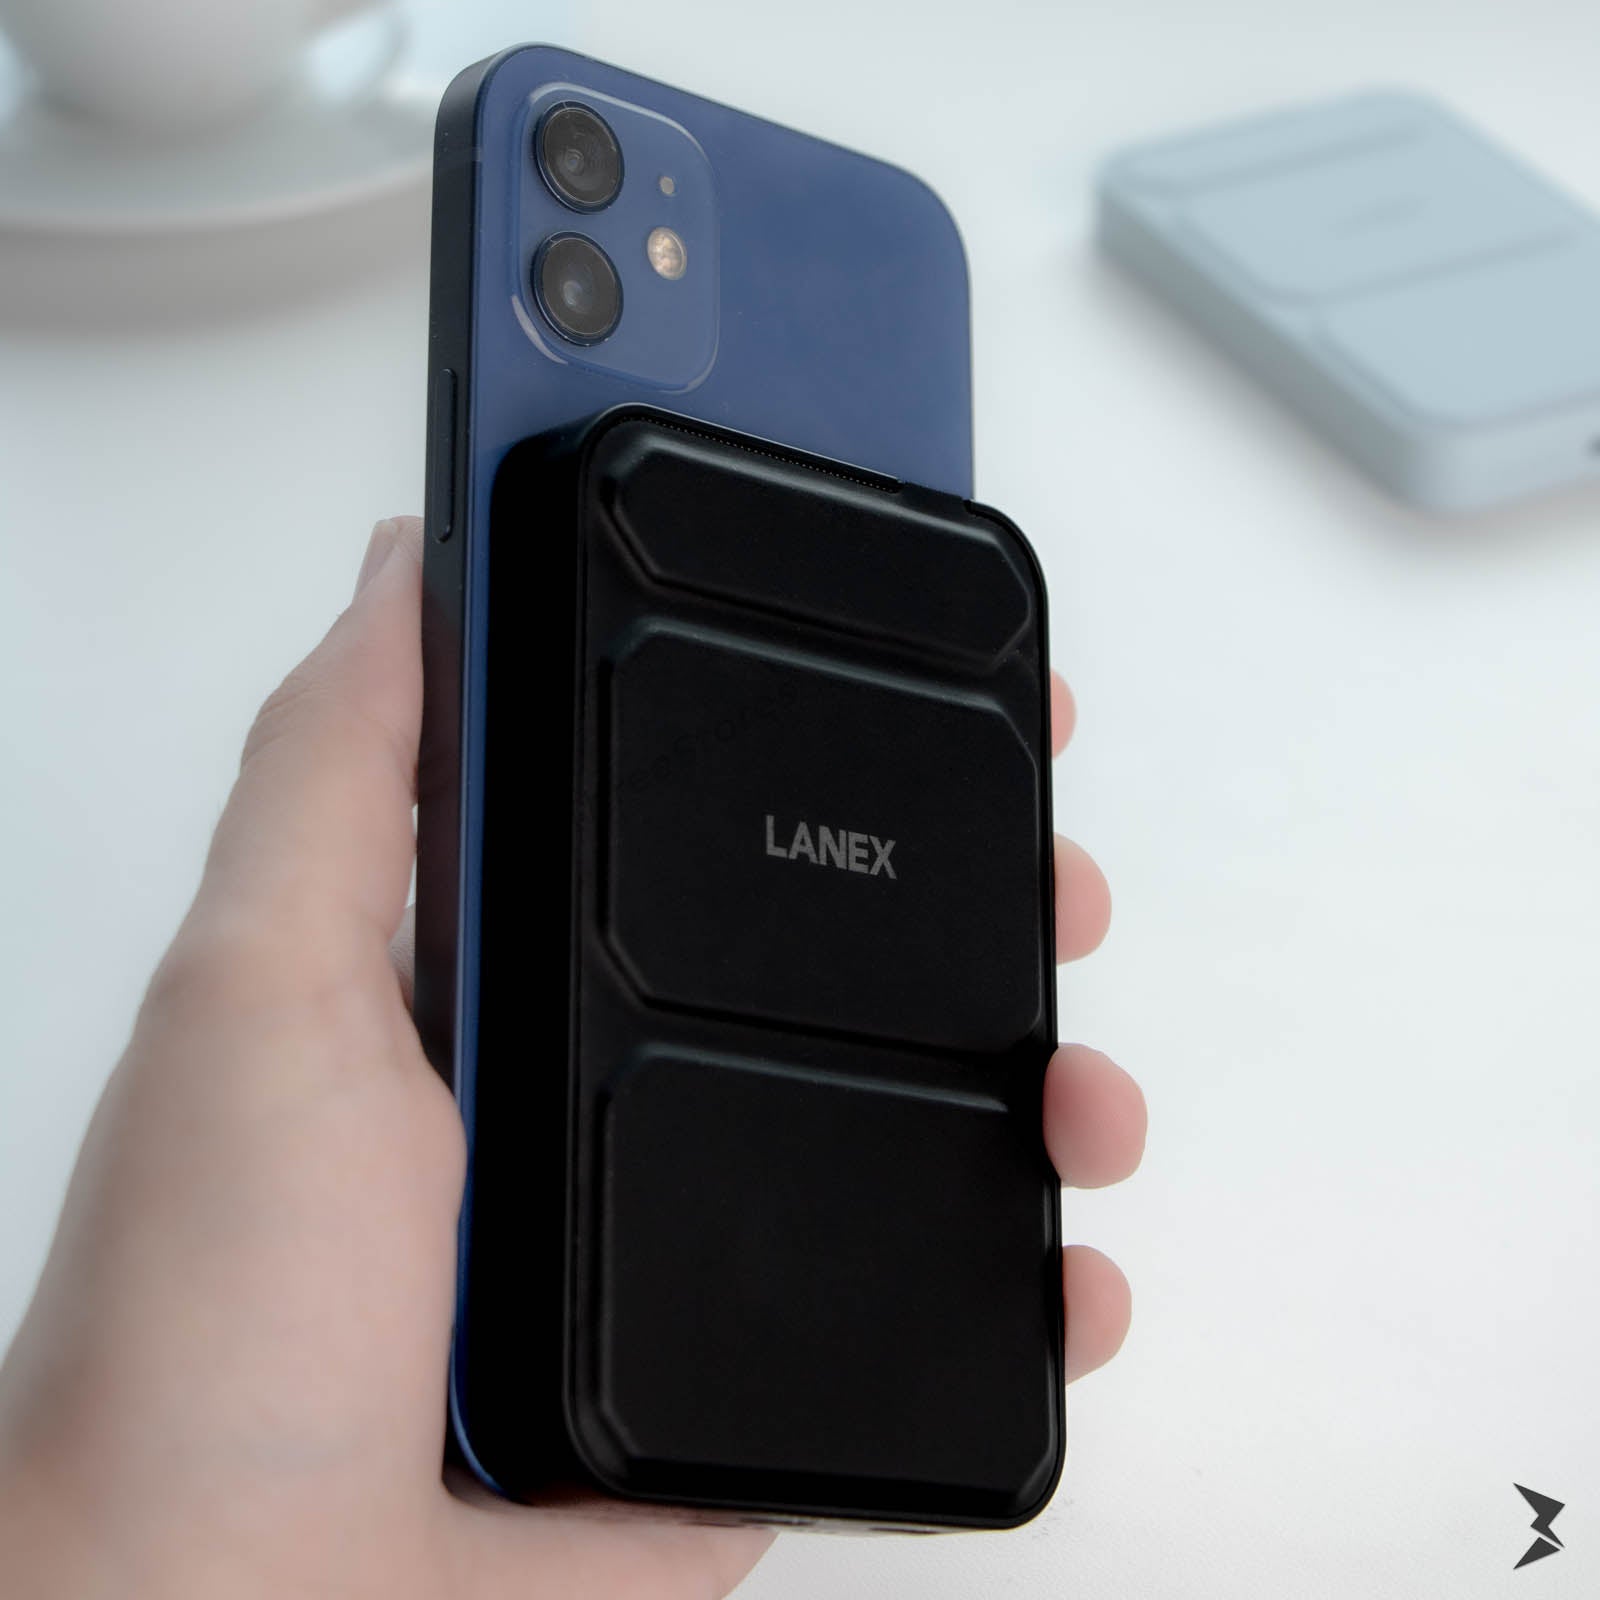 Lanex 3 in 1 magnetic Suction Wireless Power Bank 5000mAh Lp18